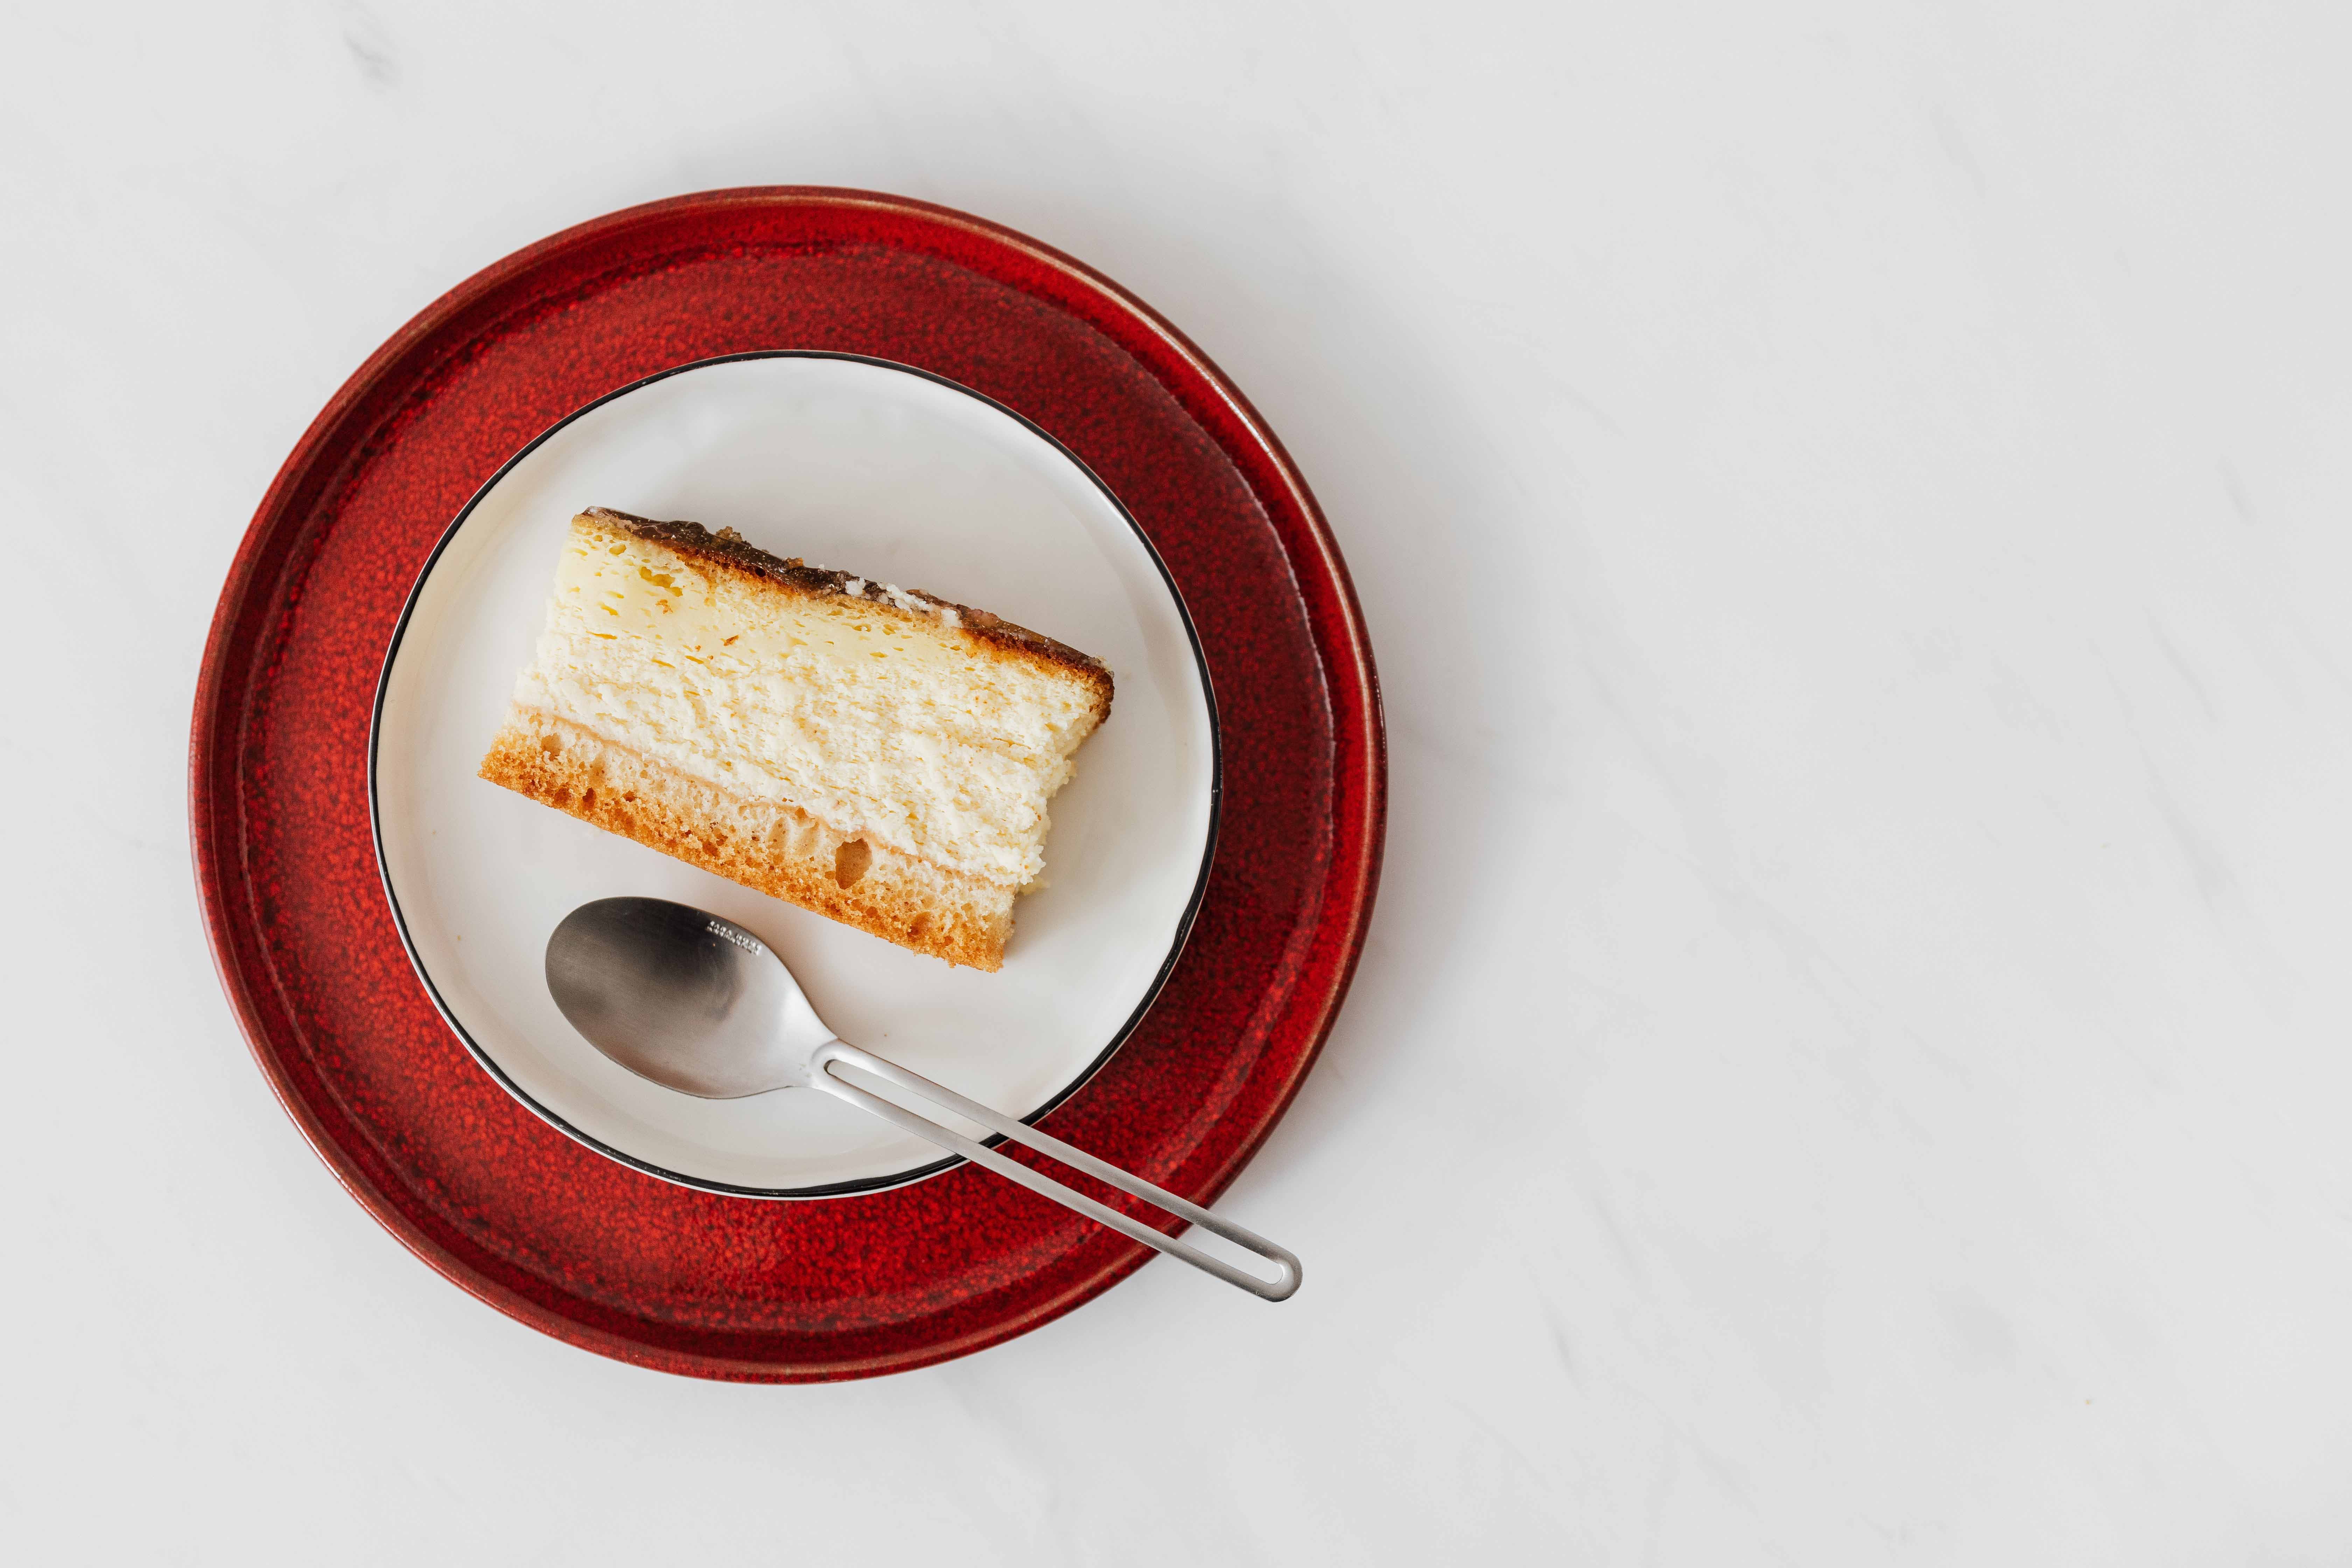 A plated piece of cake on a red plate with a spoon next to it.